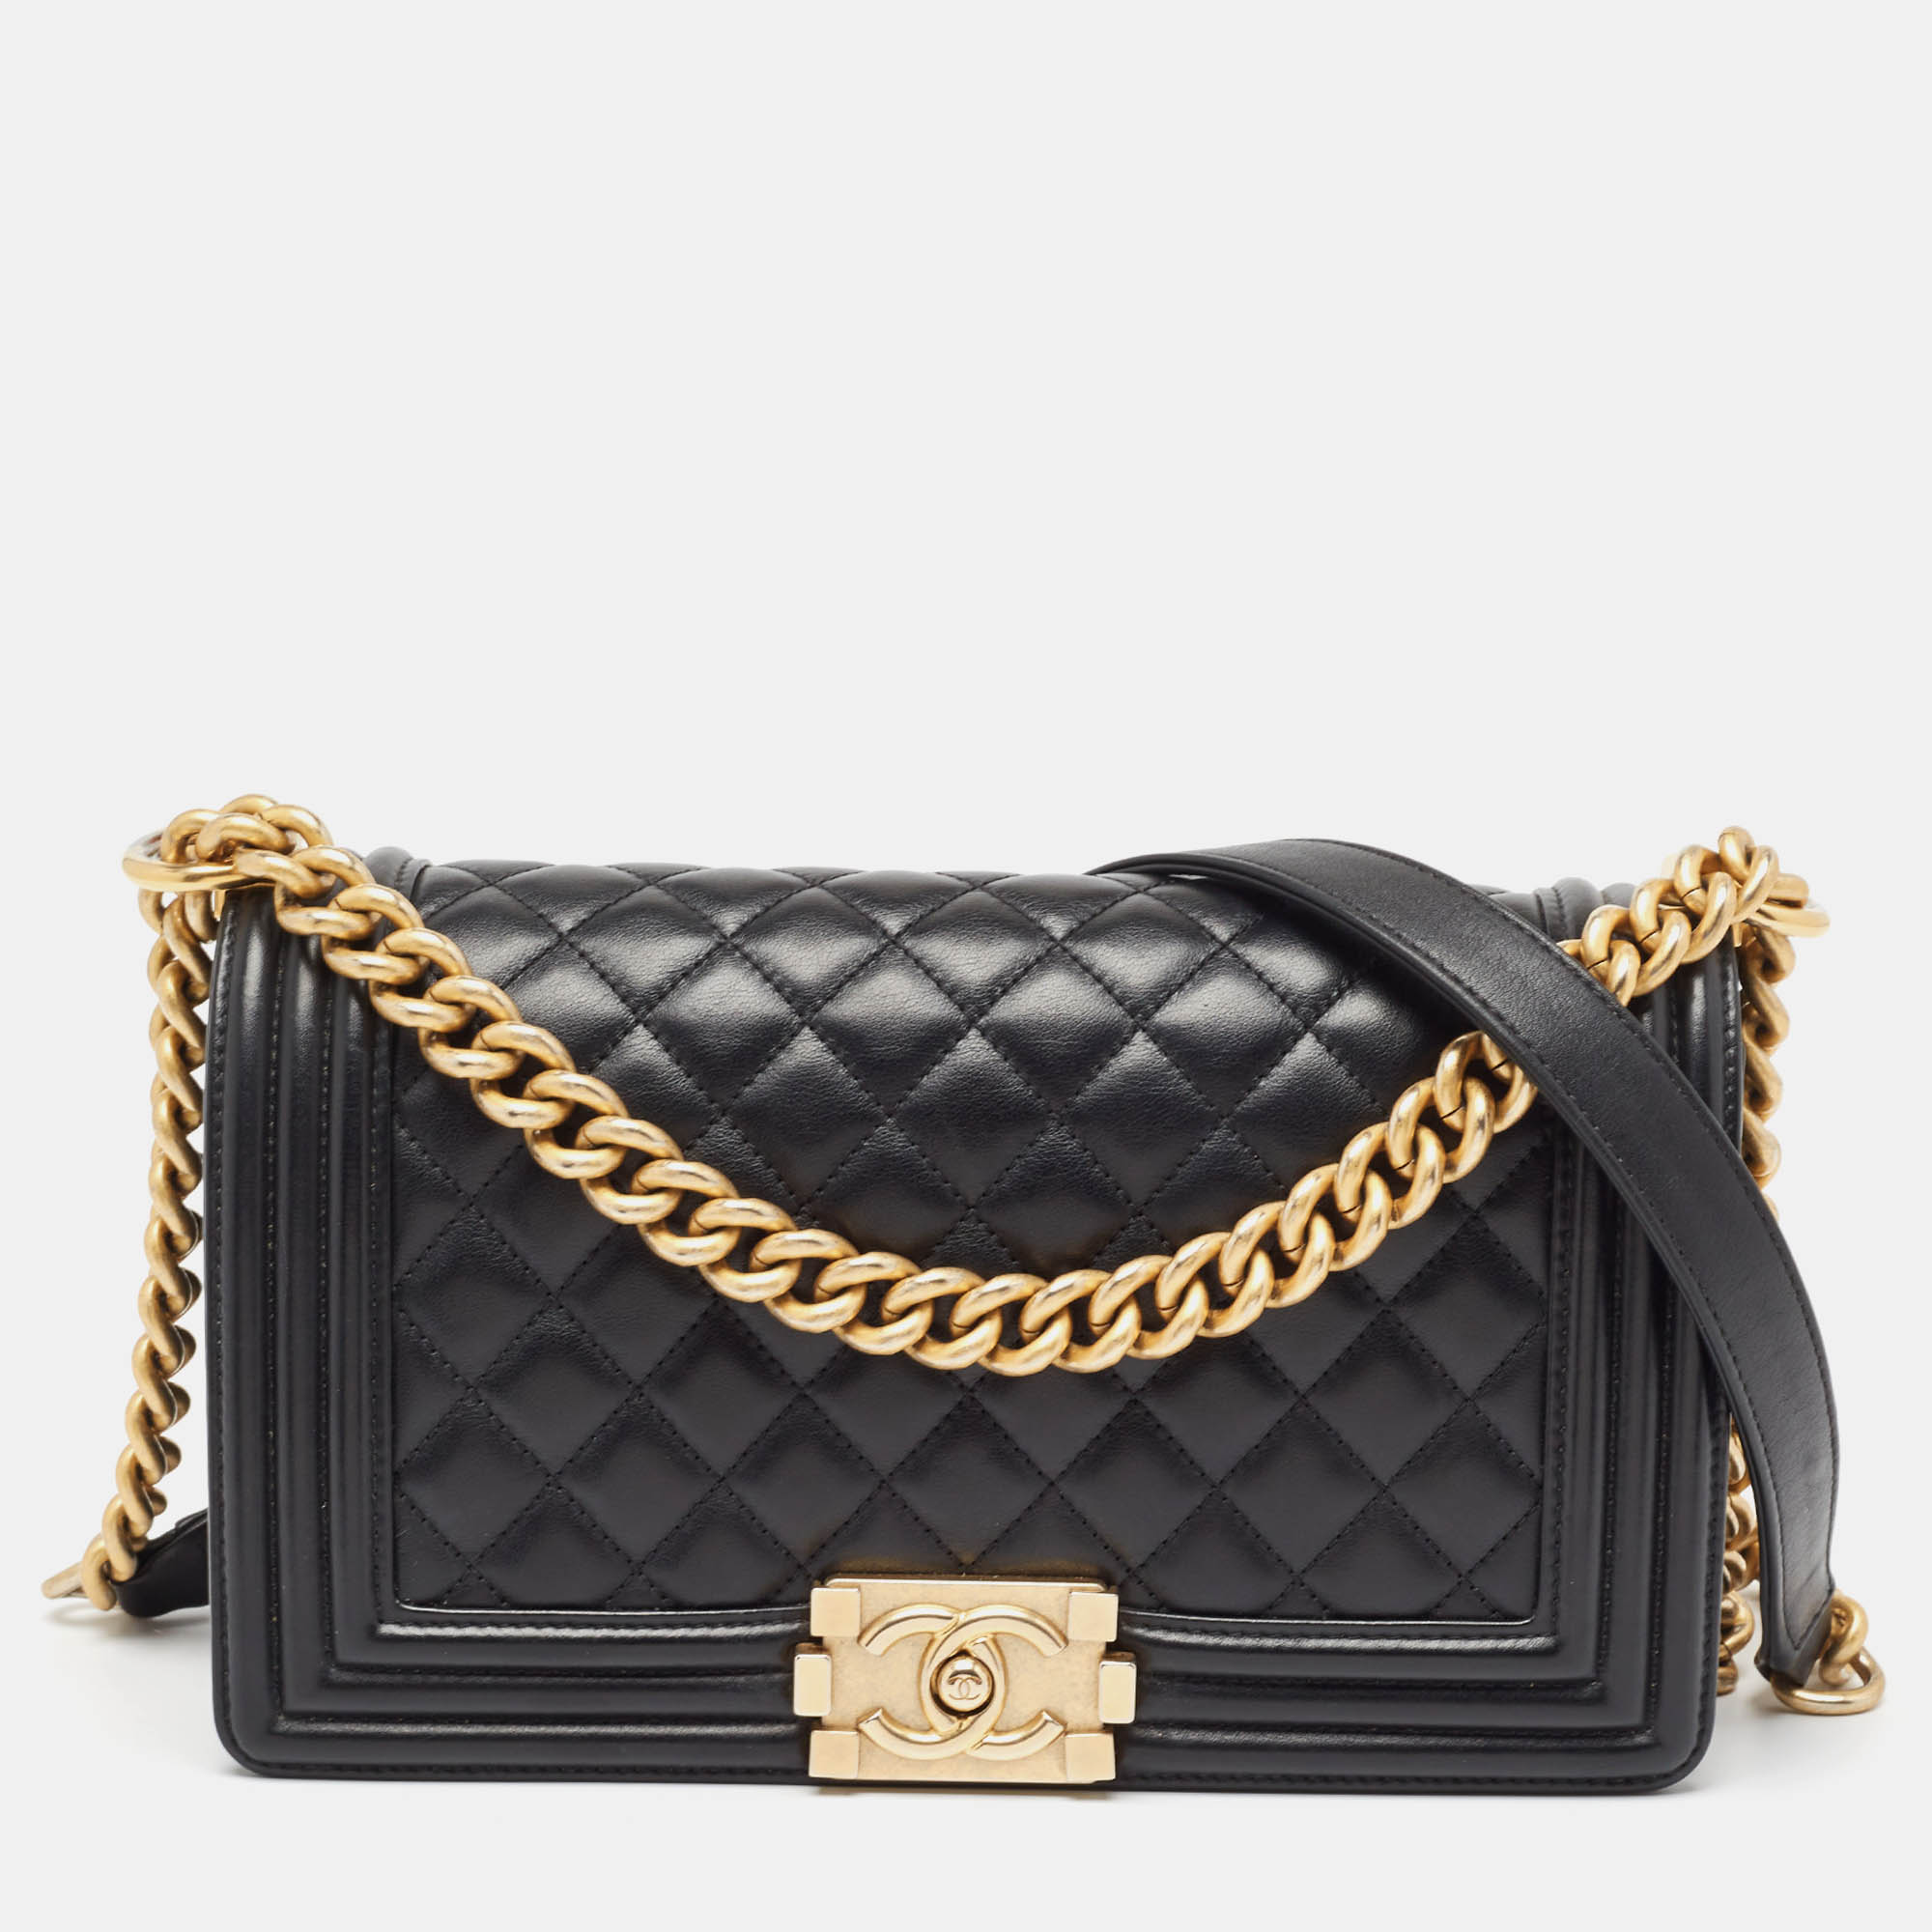 Chanel black quilted leather medium boy flap bag